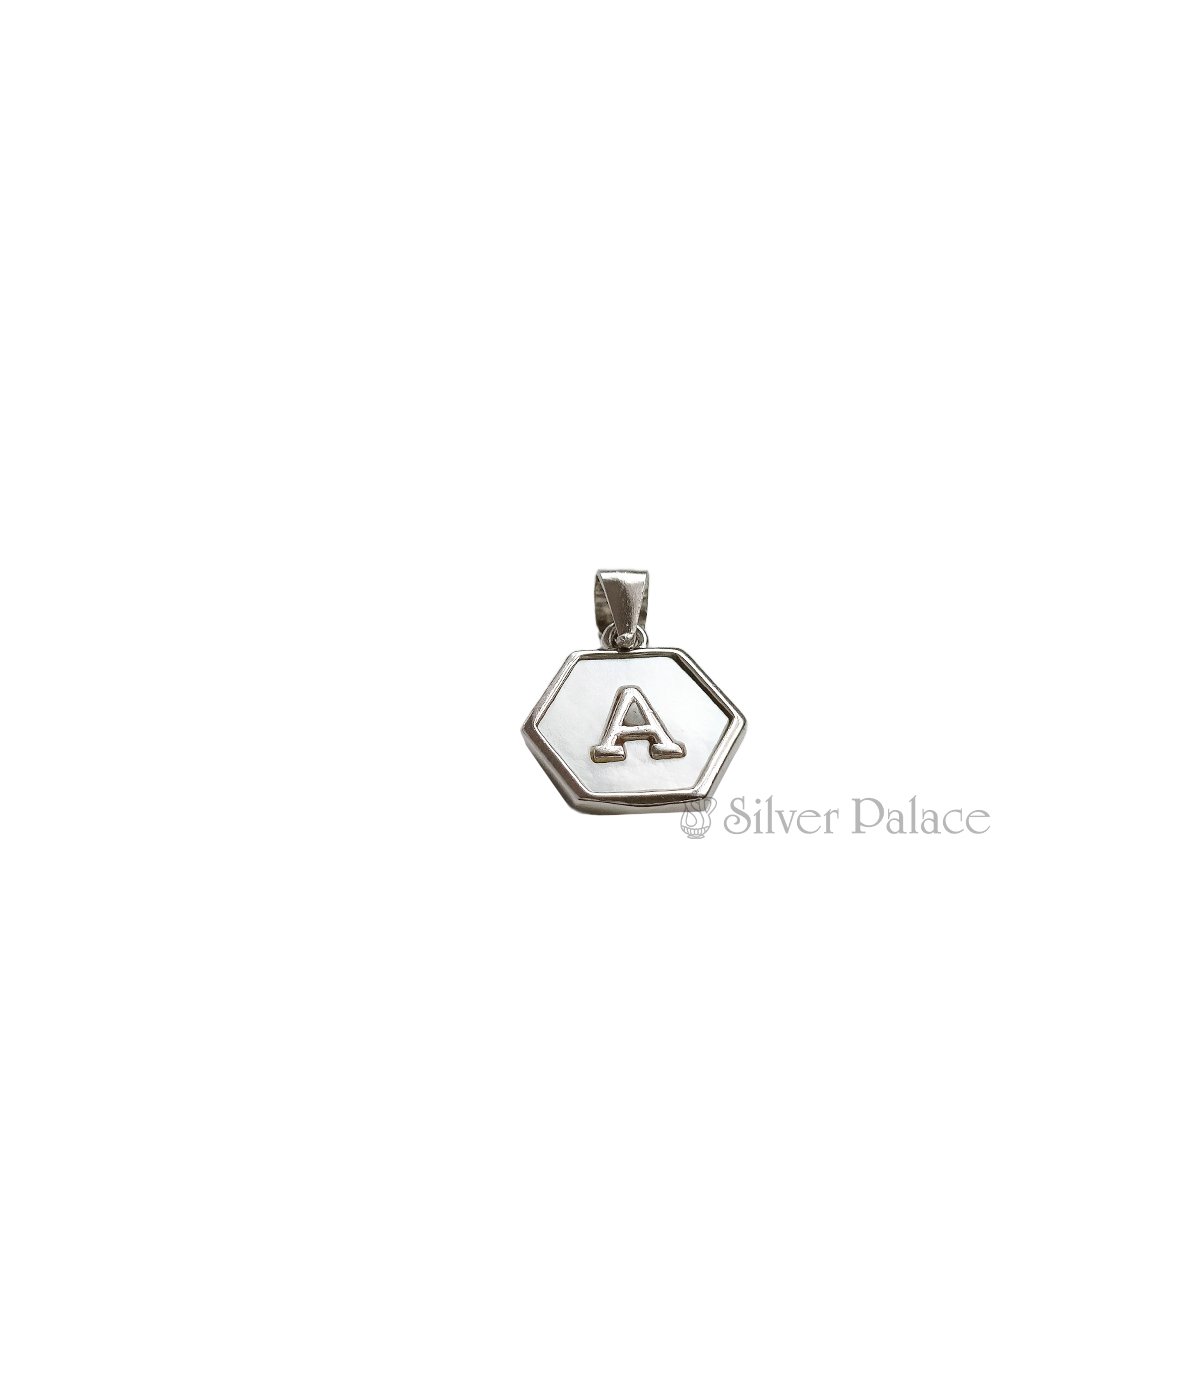 92.5 STERLING SILVER INITIAL LETTER A PENDANT